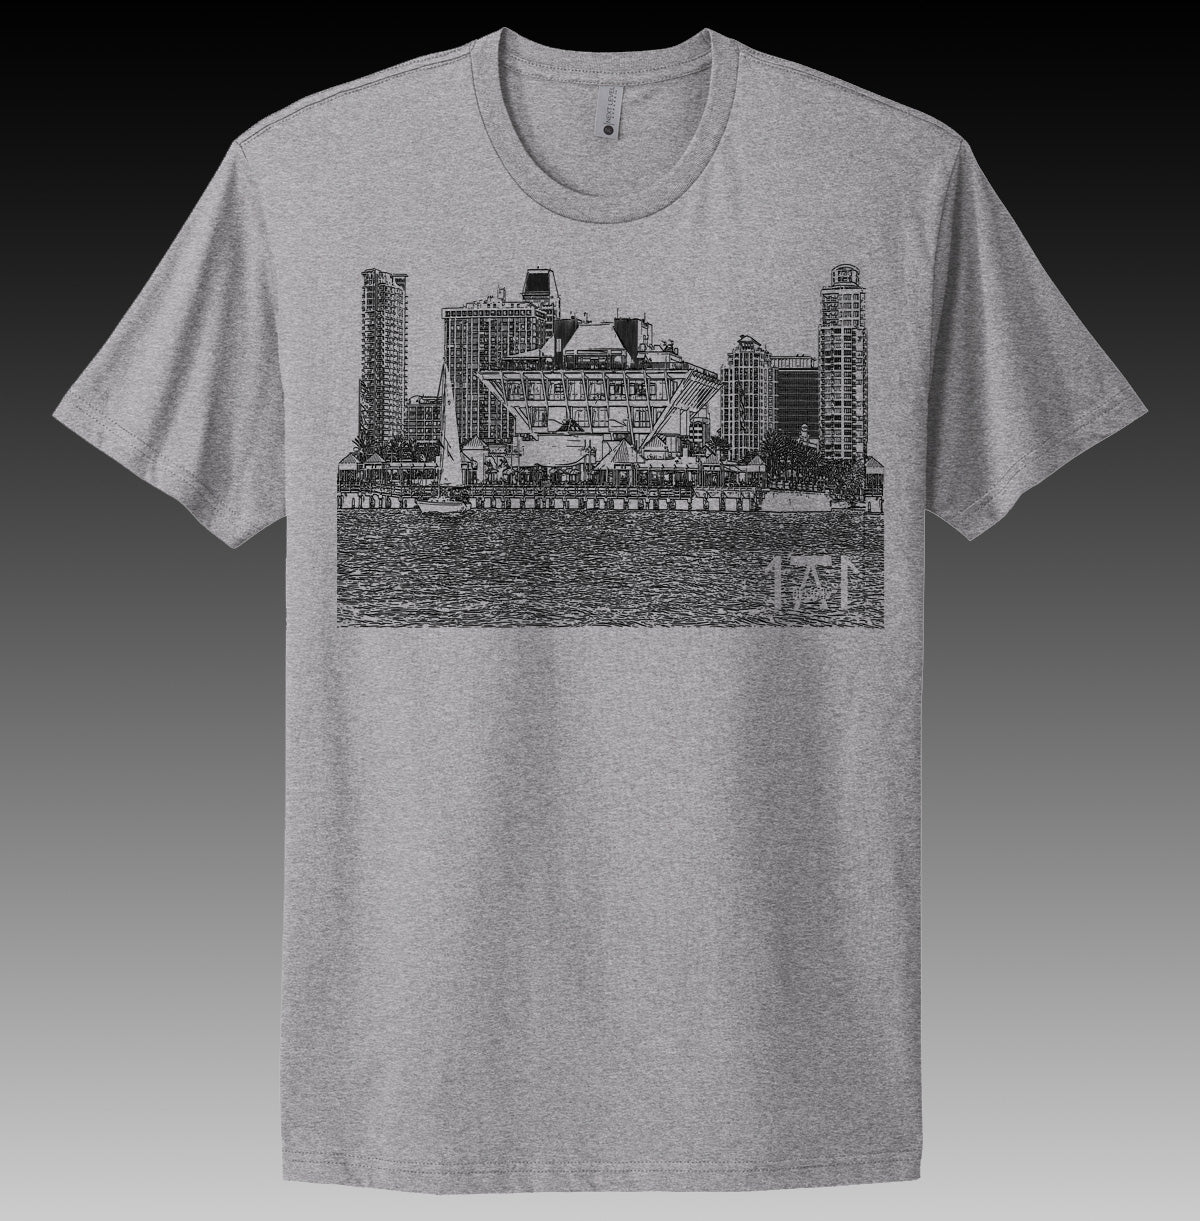 grey shirt featuring the St. Pete St. Petersburg pier and the downtown skyline locally made t shirt